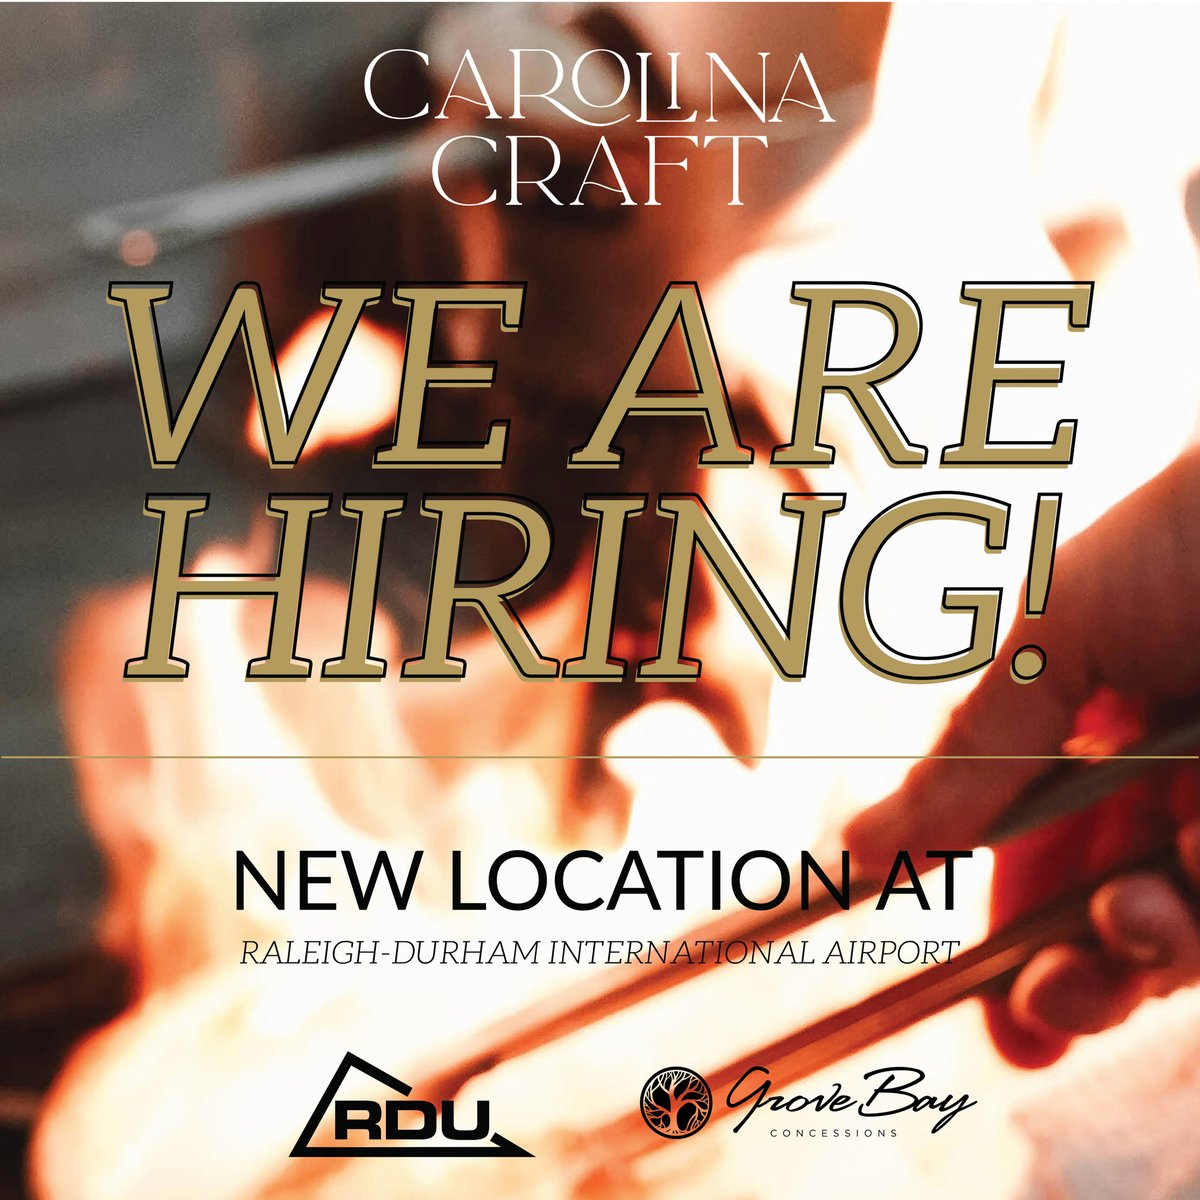 Job alert! ✈️ Grove Bay Hospitality Group is hiring for baristas, cooks, supervisors, managers and more as we get ready to open Crawford's Genuine, Black & White Coffee Roasters and Carolina Craft this summer! Find all openings at their job fair link: 🔗 …ve-bay-hospitality-group.r365hire.com/jobs?loc=Morri…